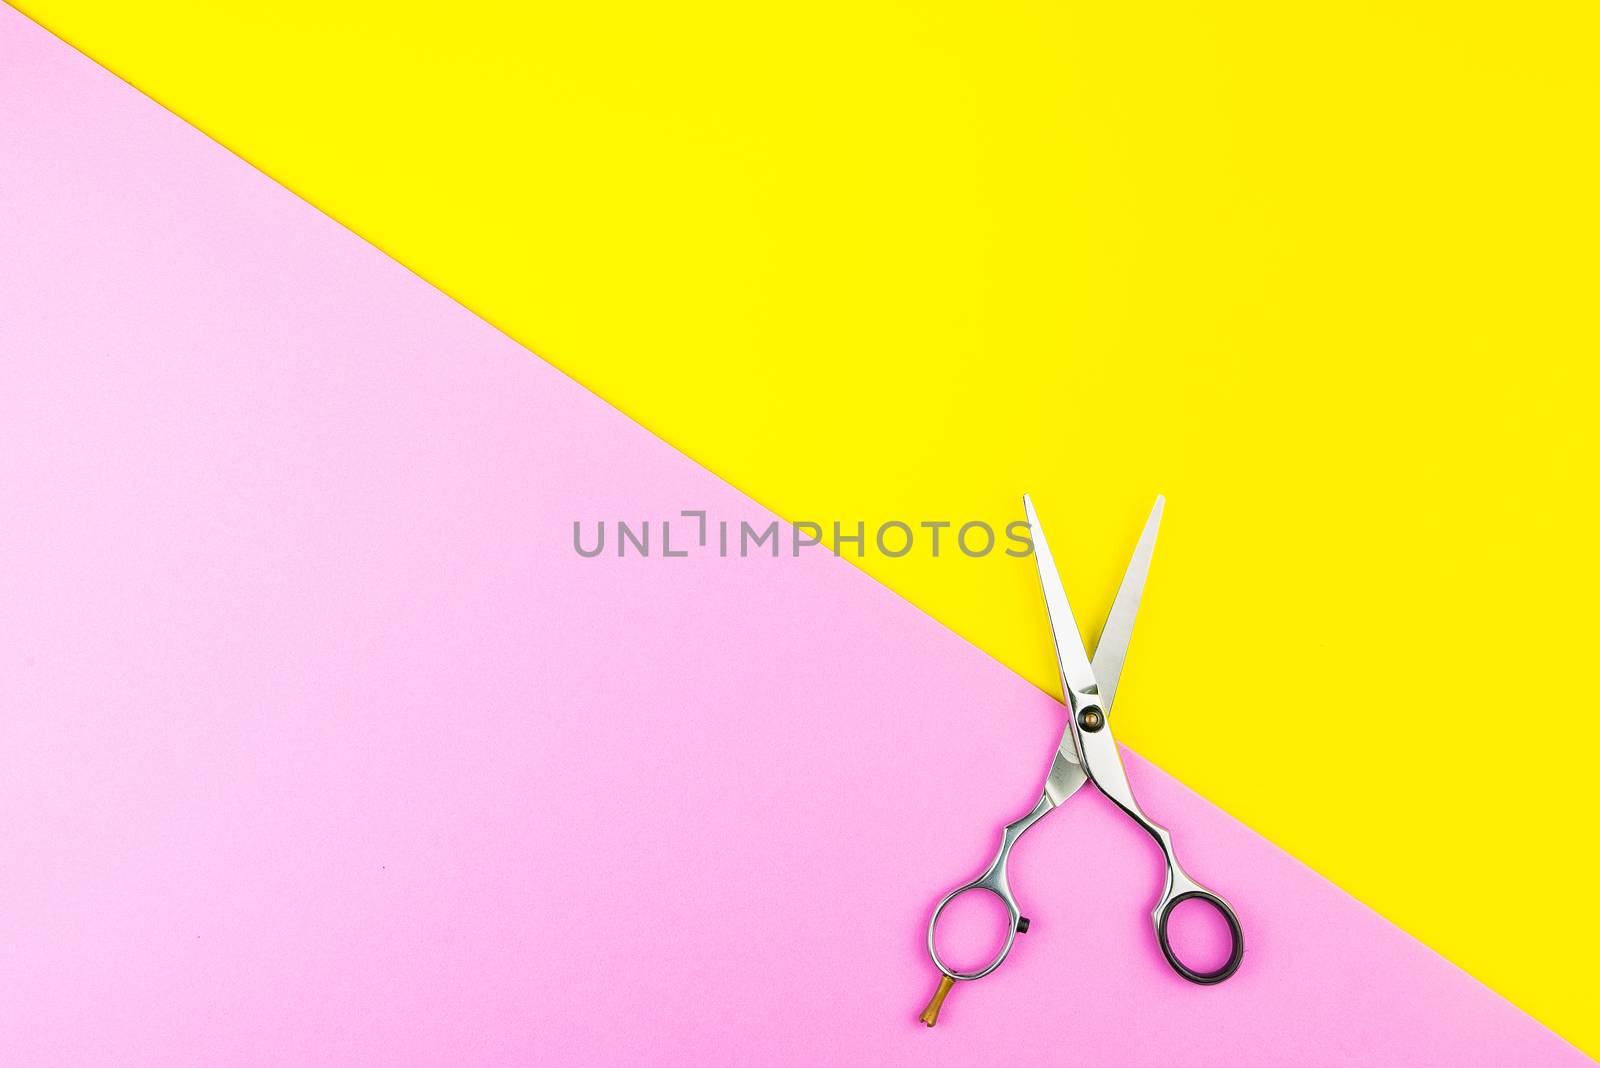 Stylish Professional Barber Scissors on yellow and pink background. Hairdresser salon concept, Hairdressing Set. Haircut accessories. Copy space image, flat lay